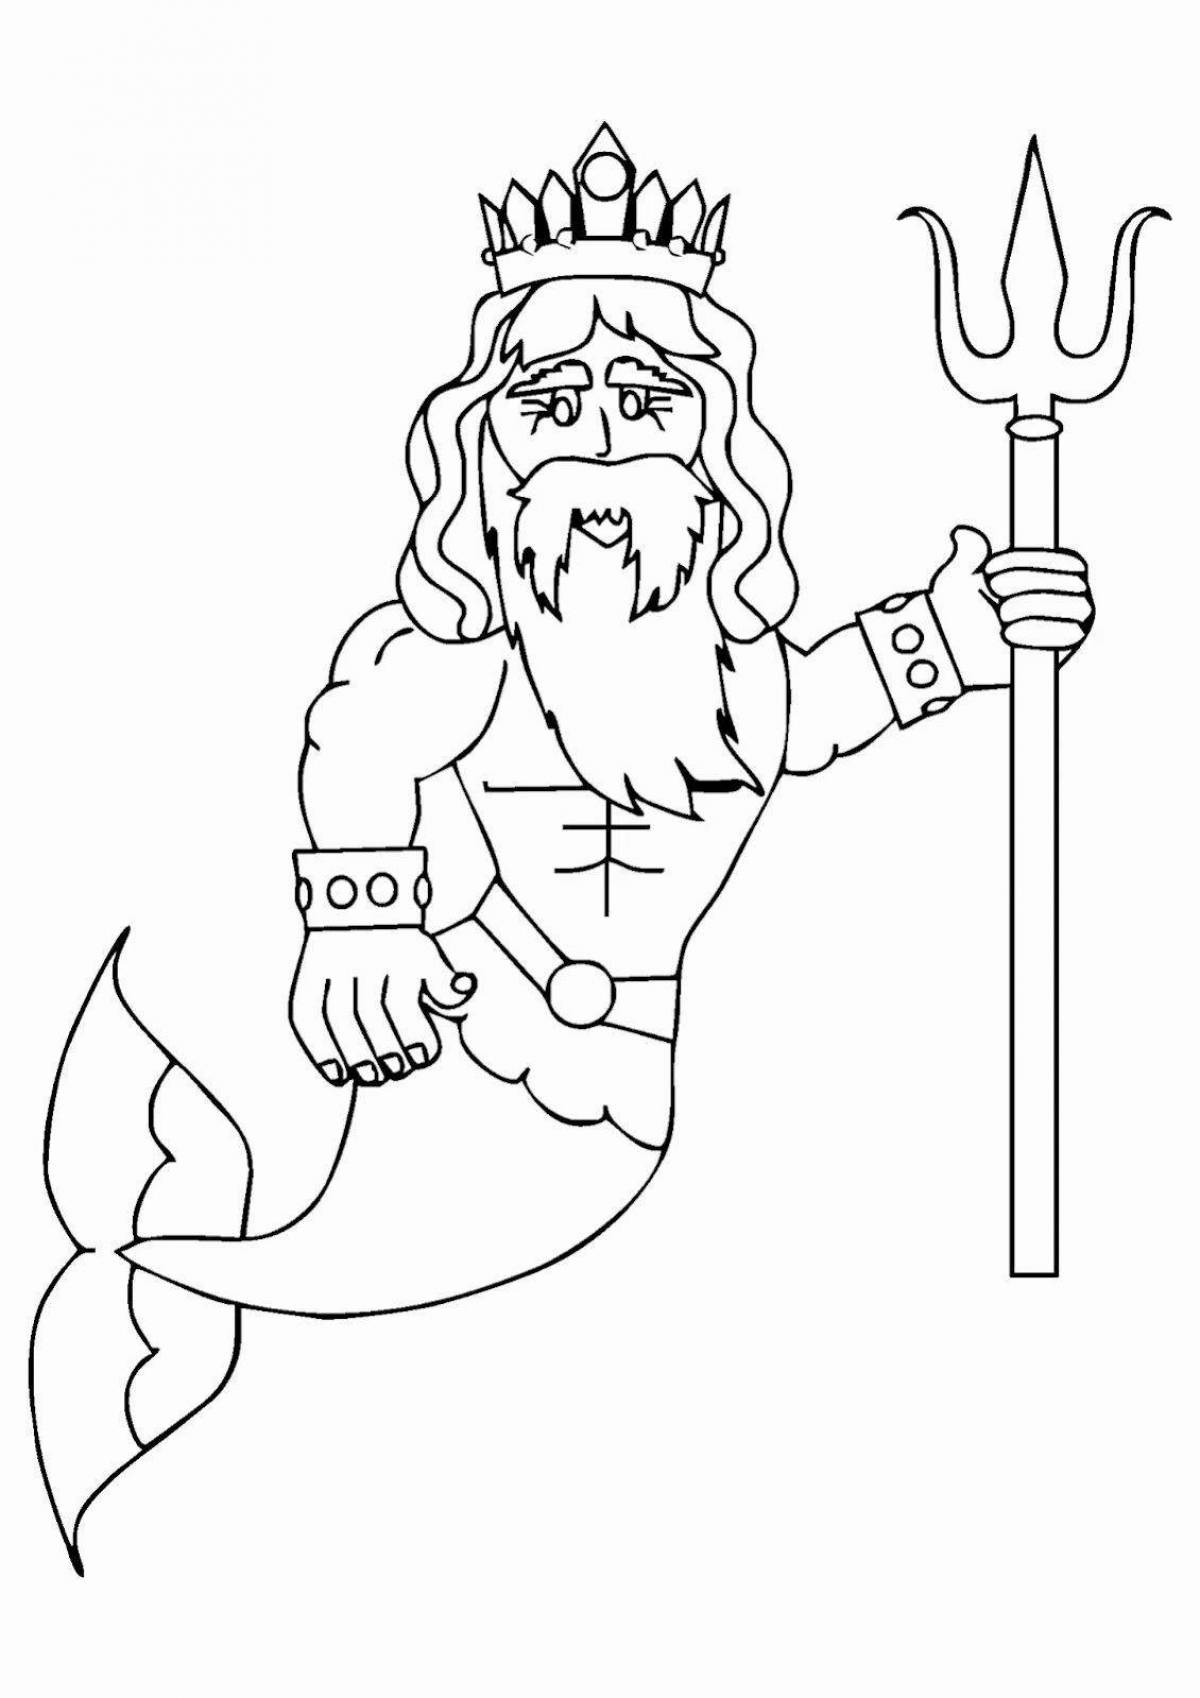 Colorful perun coloring page